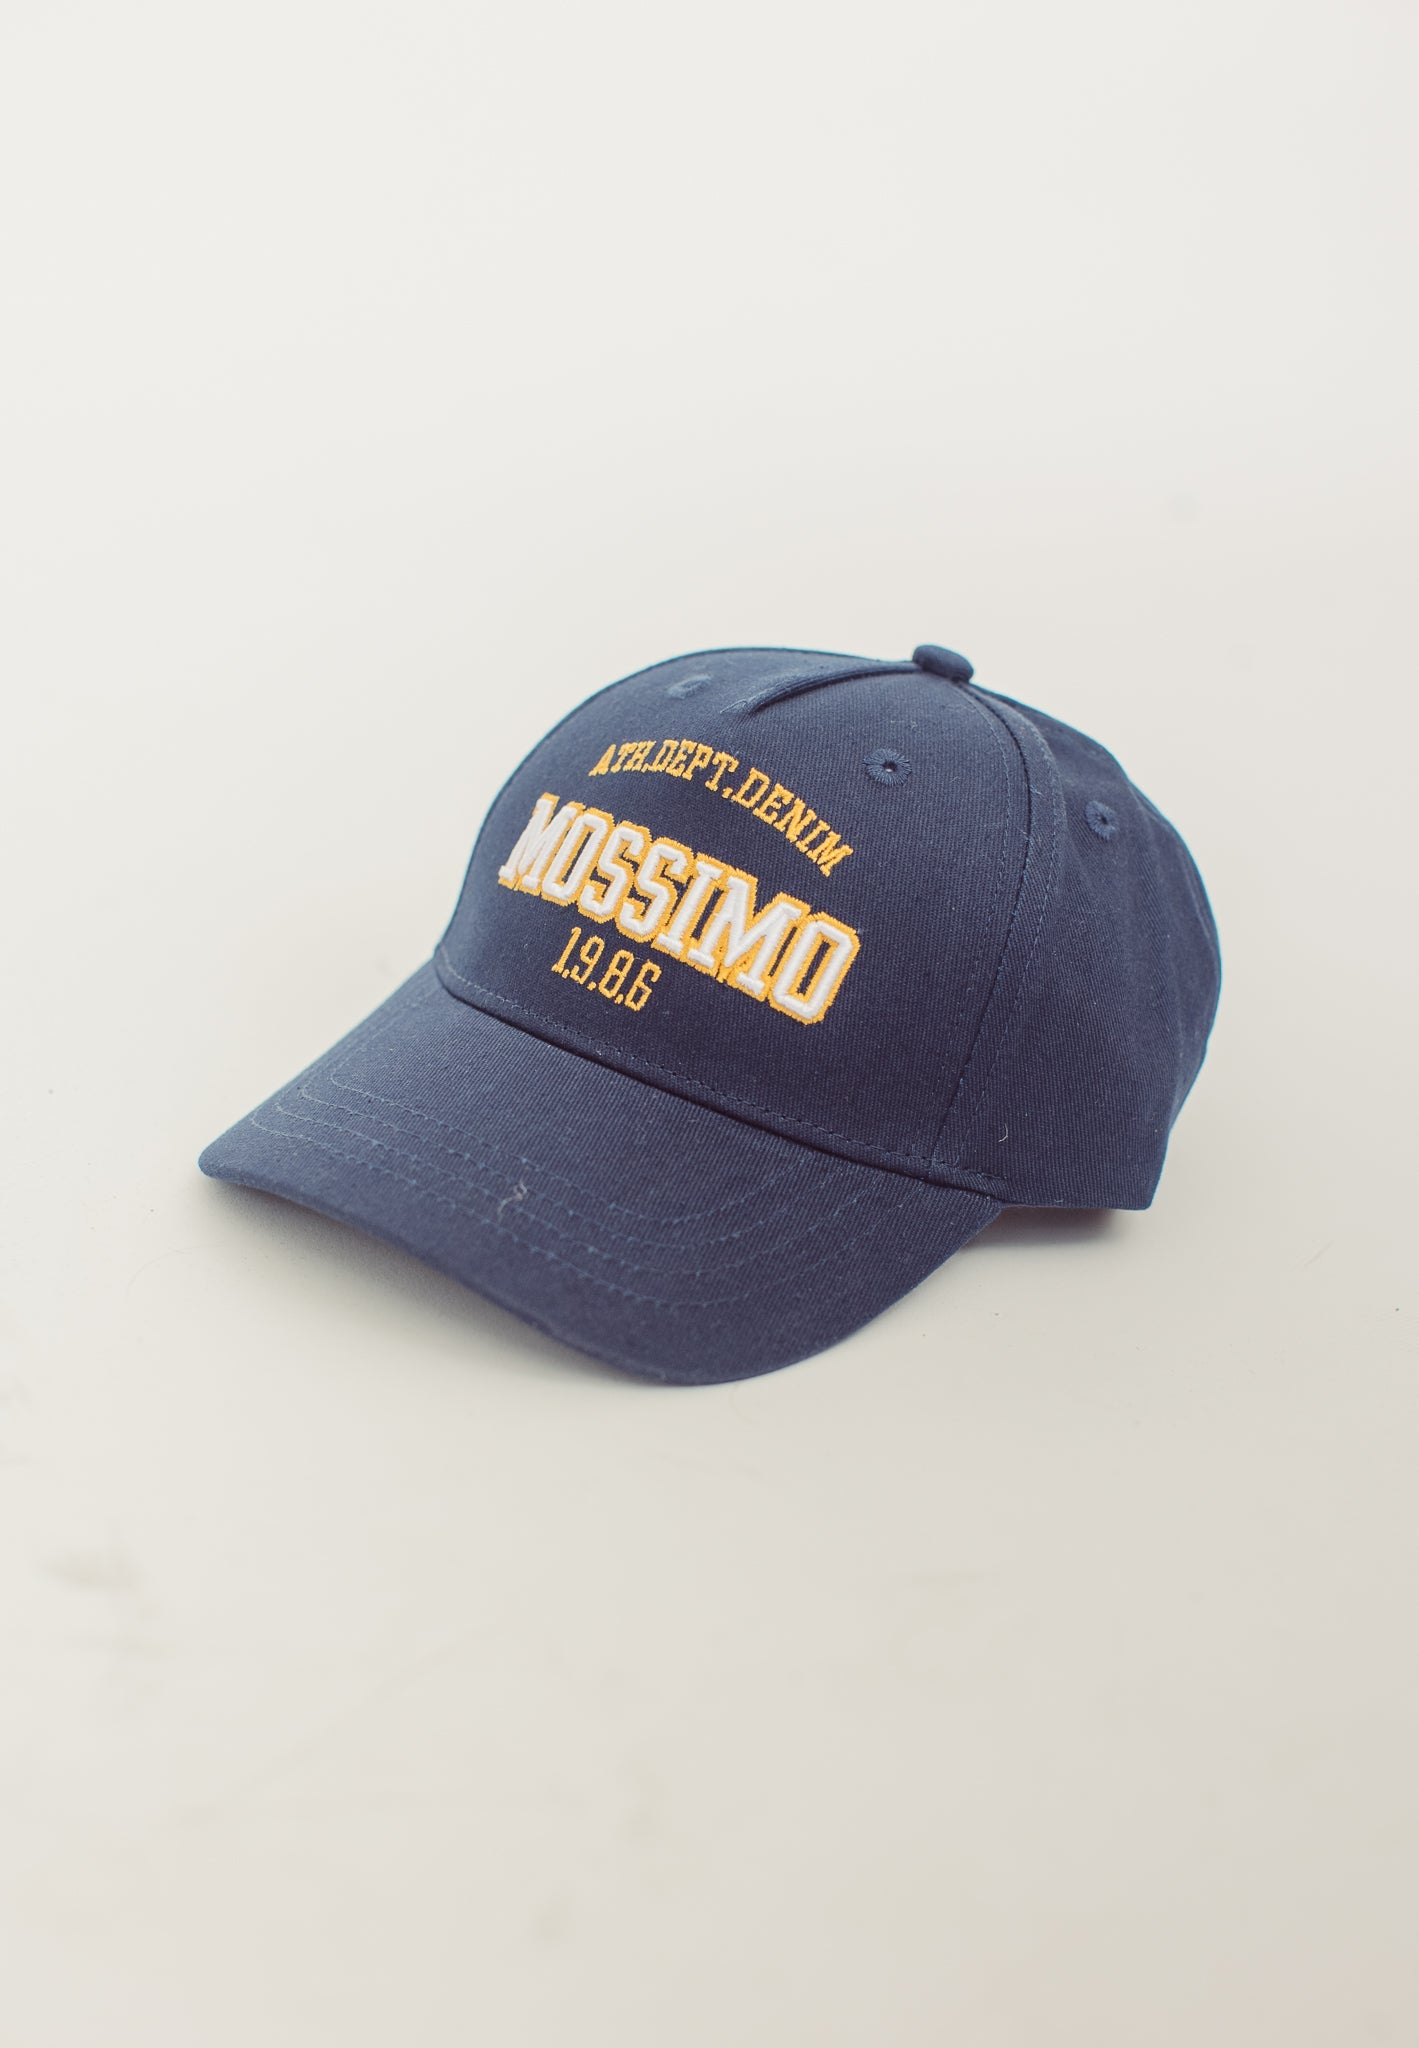 Mosskids Athletic Cap with Embroidery - Mossimo PH